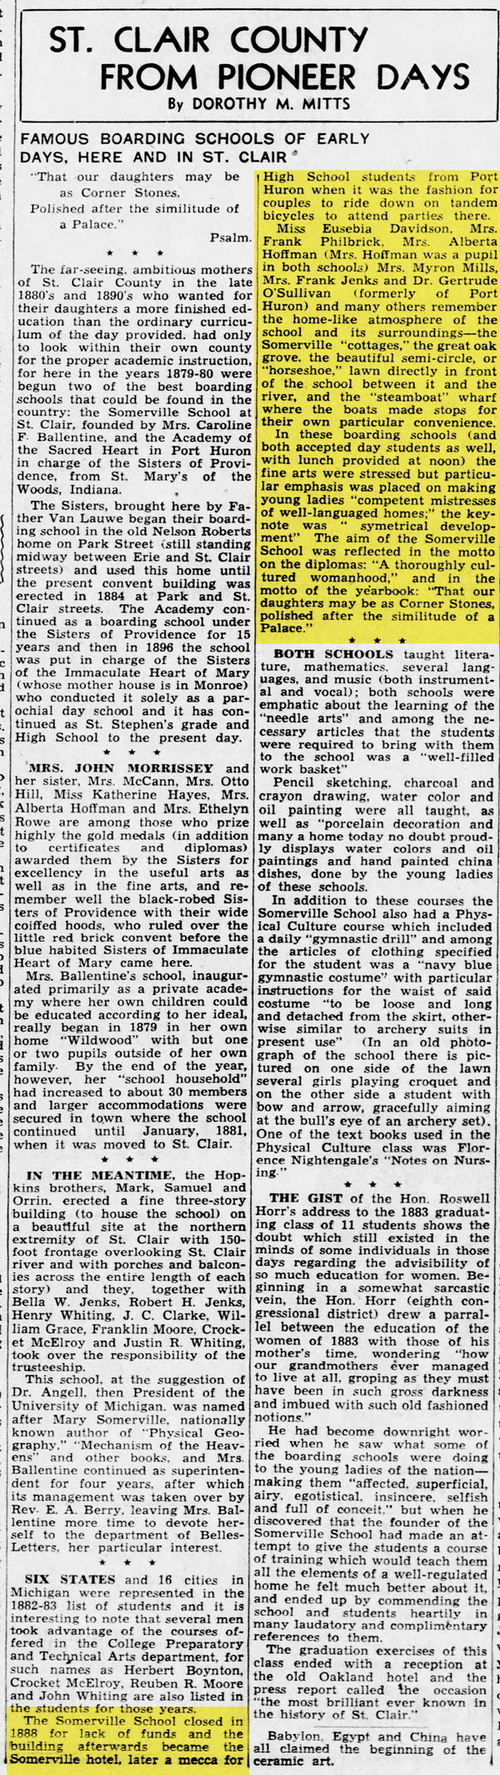 Somervile Hotel - Sep 22 1946 Article